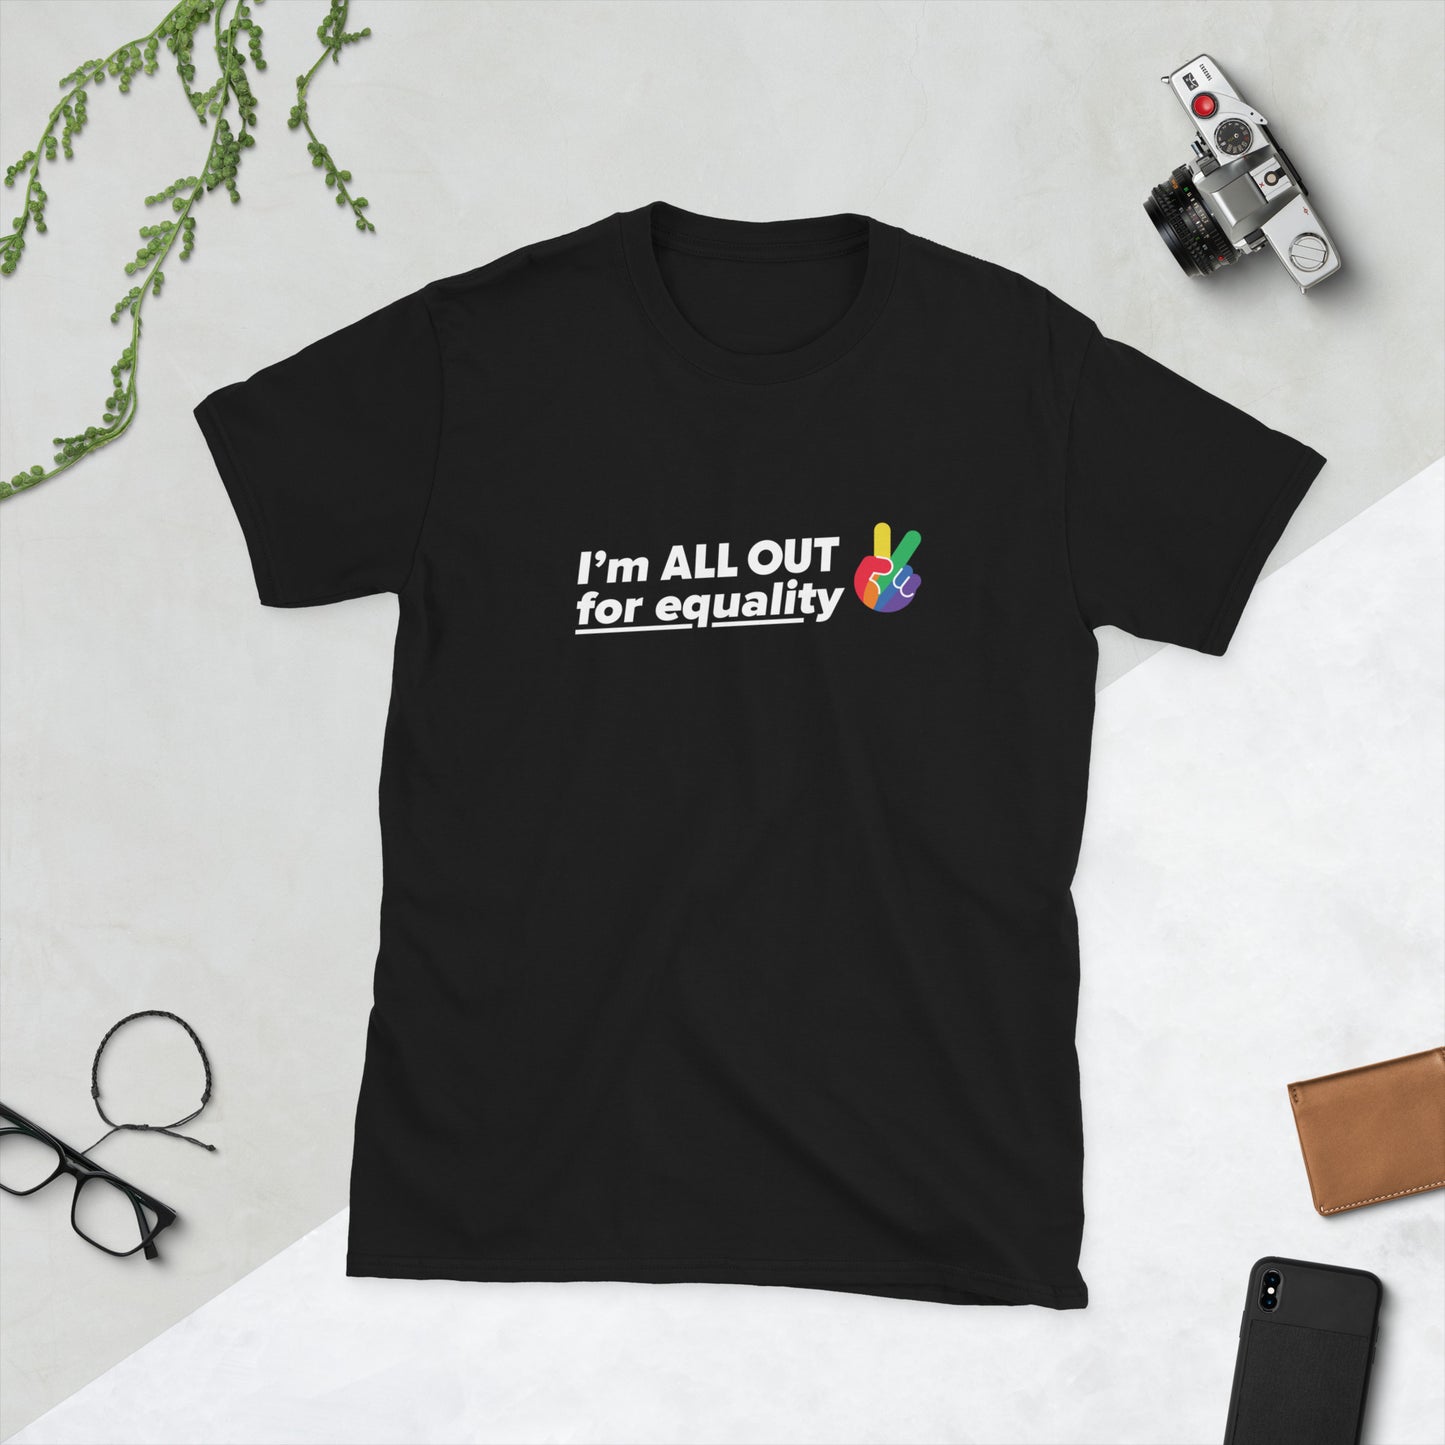 All Out for Equality - Short-Sleeve Unisex T-Shirt